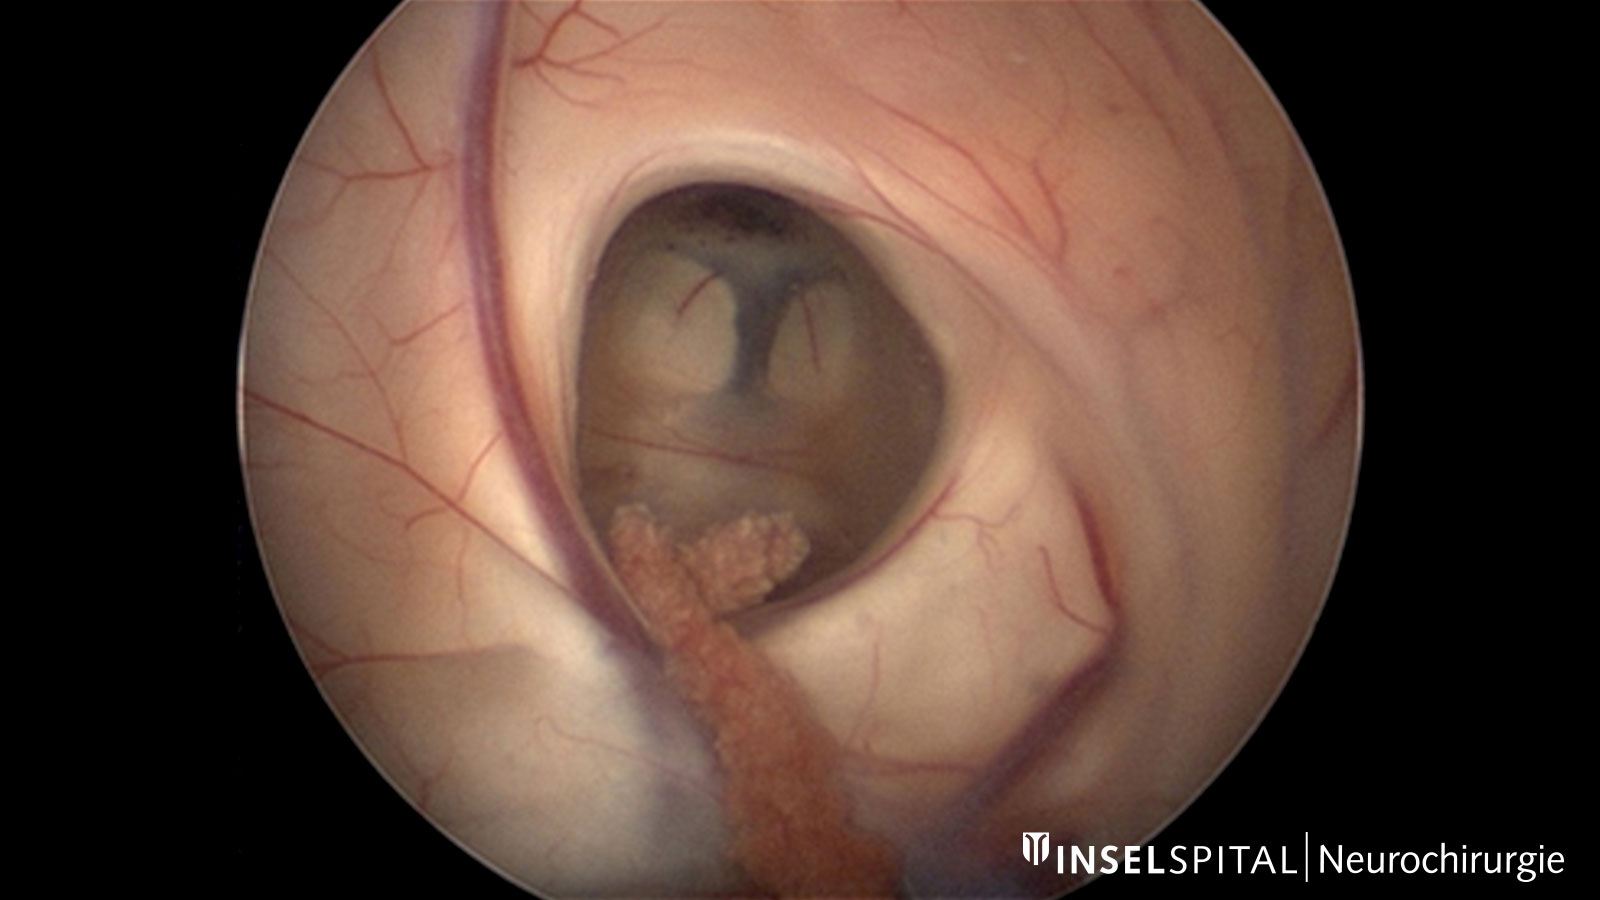 View through an endoscope from the right lateral ventricle to the 3rd ventricle